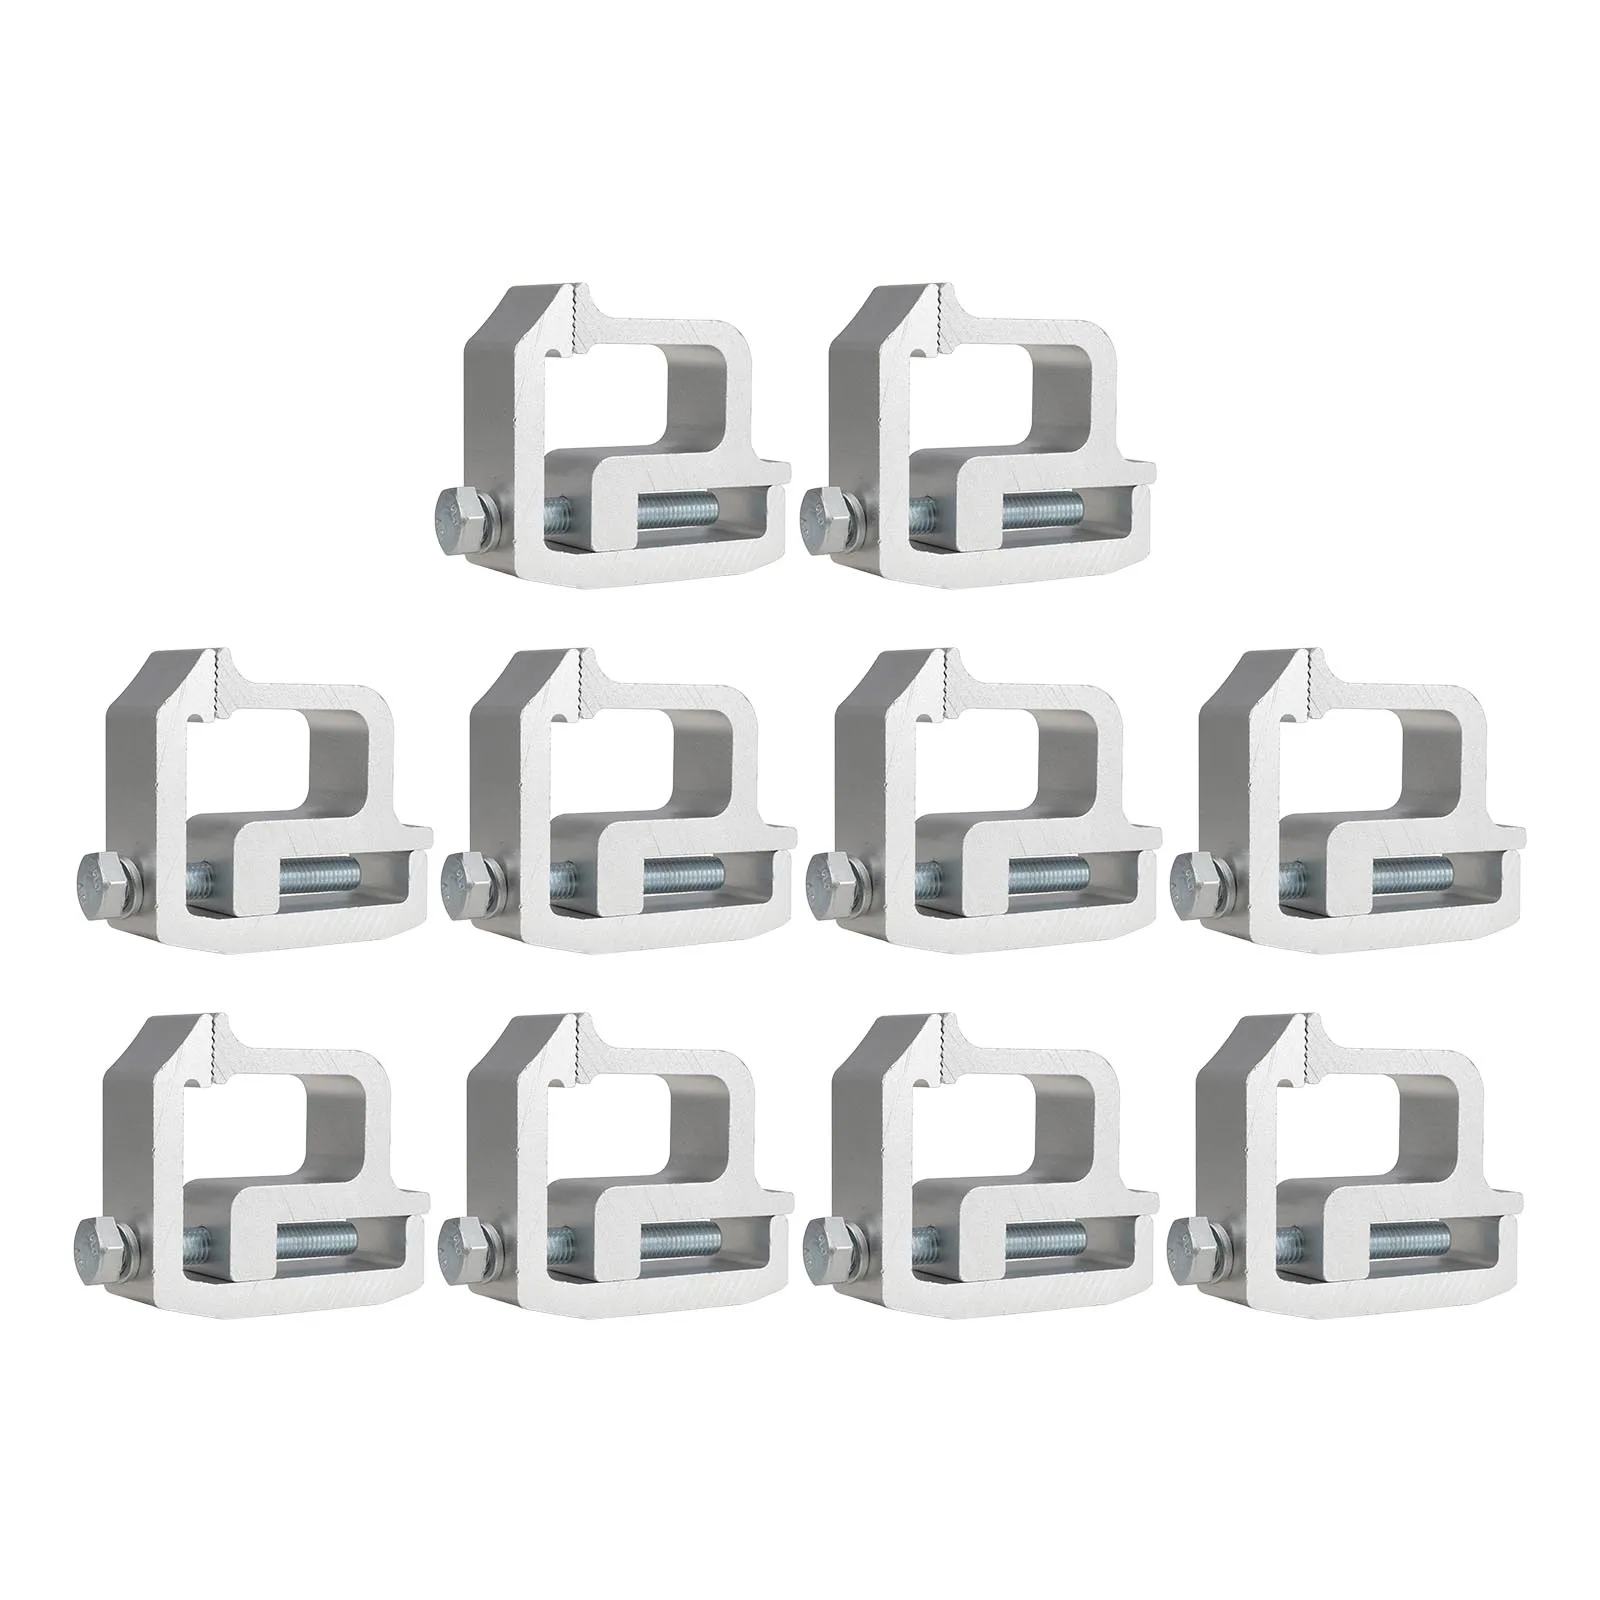 Mounting Clamps Truck Caps Camper Shell for Chevy Sierra 1500 2500 3500 and More Pick-up Truck Models Truck Bed Parts Silver